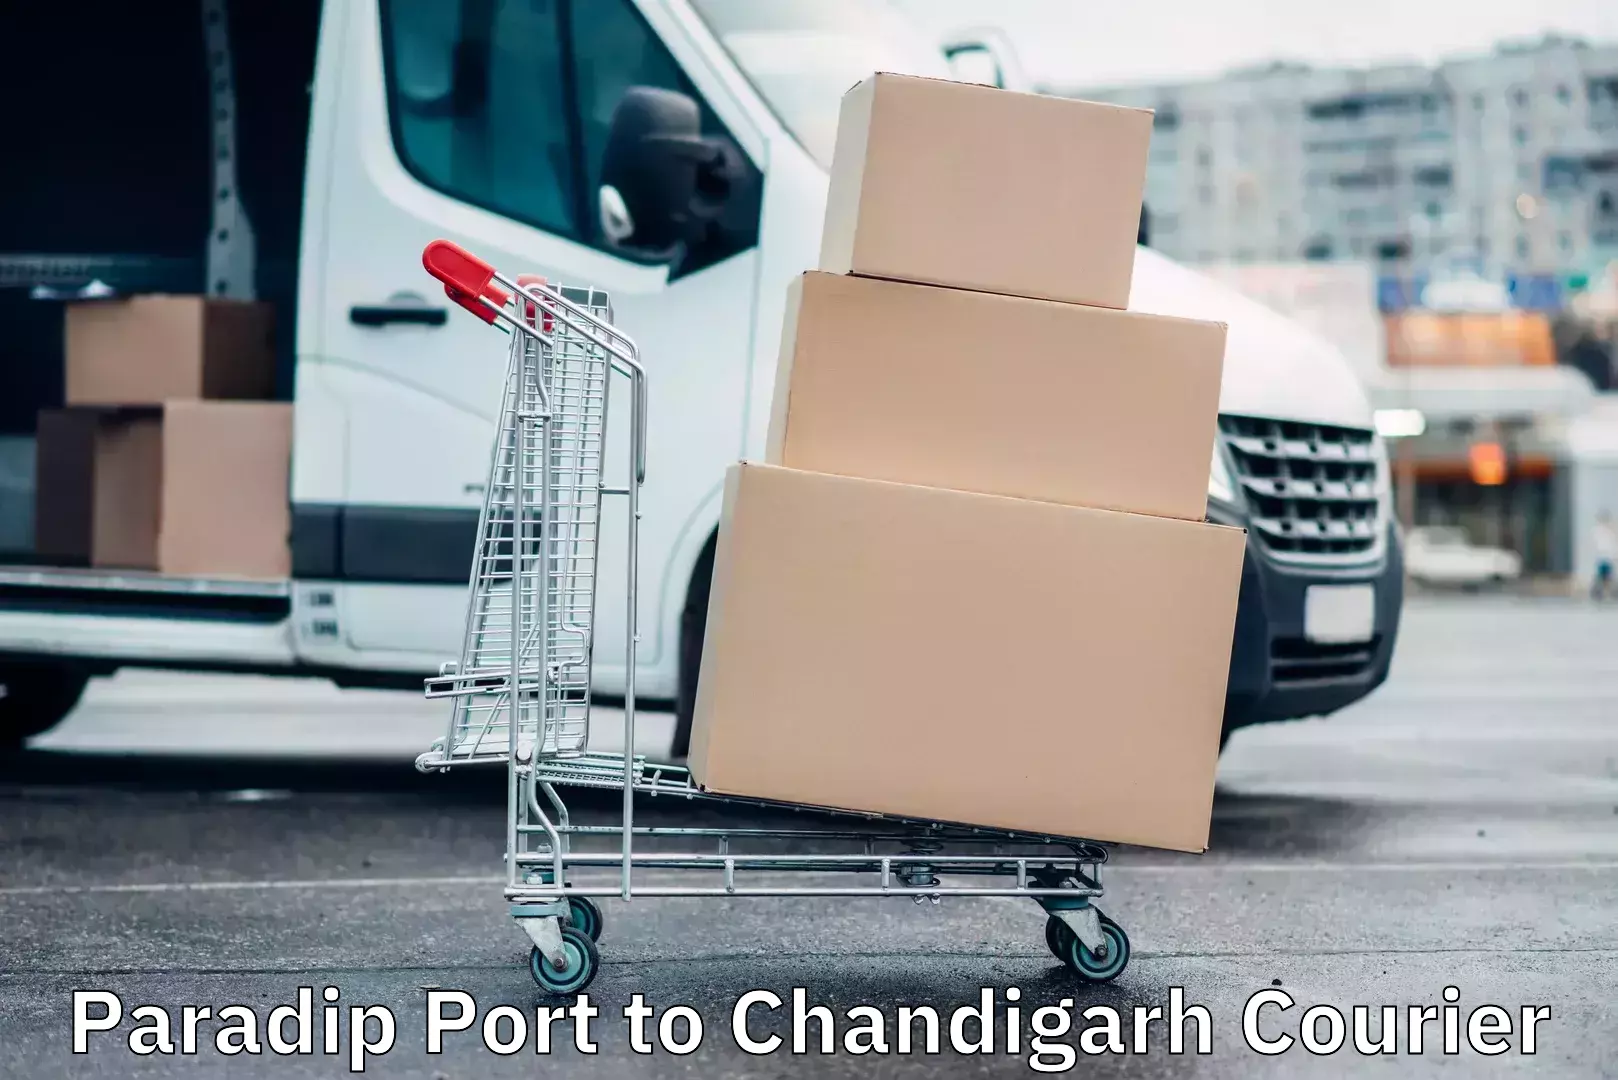 Large package courier Paradip Port to Chandigarh